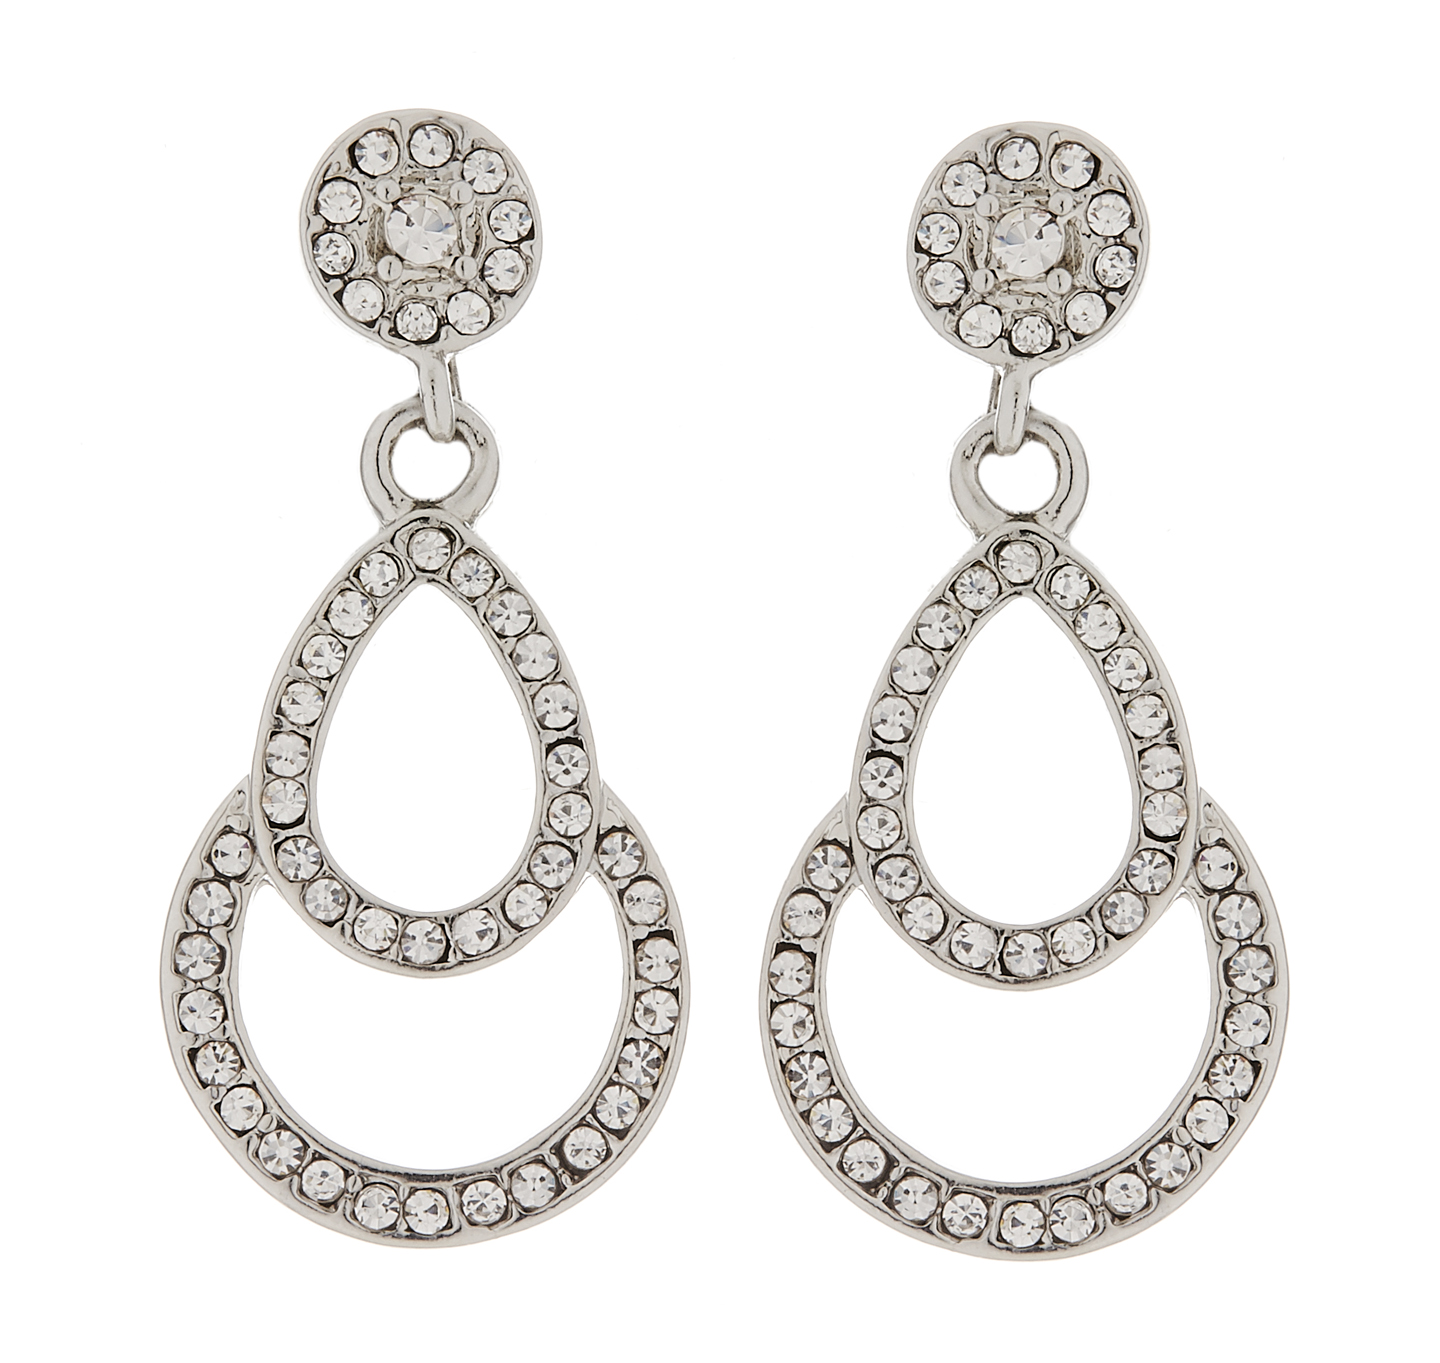 Clip On Earrings - Antonia - silver drop earring with clear crystals